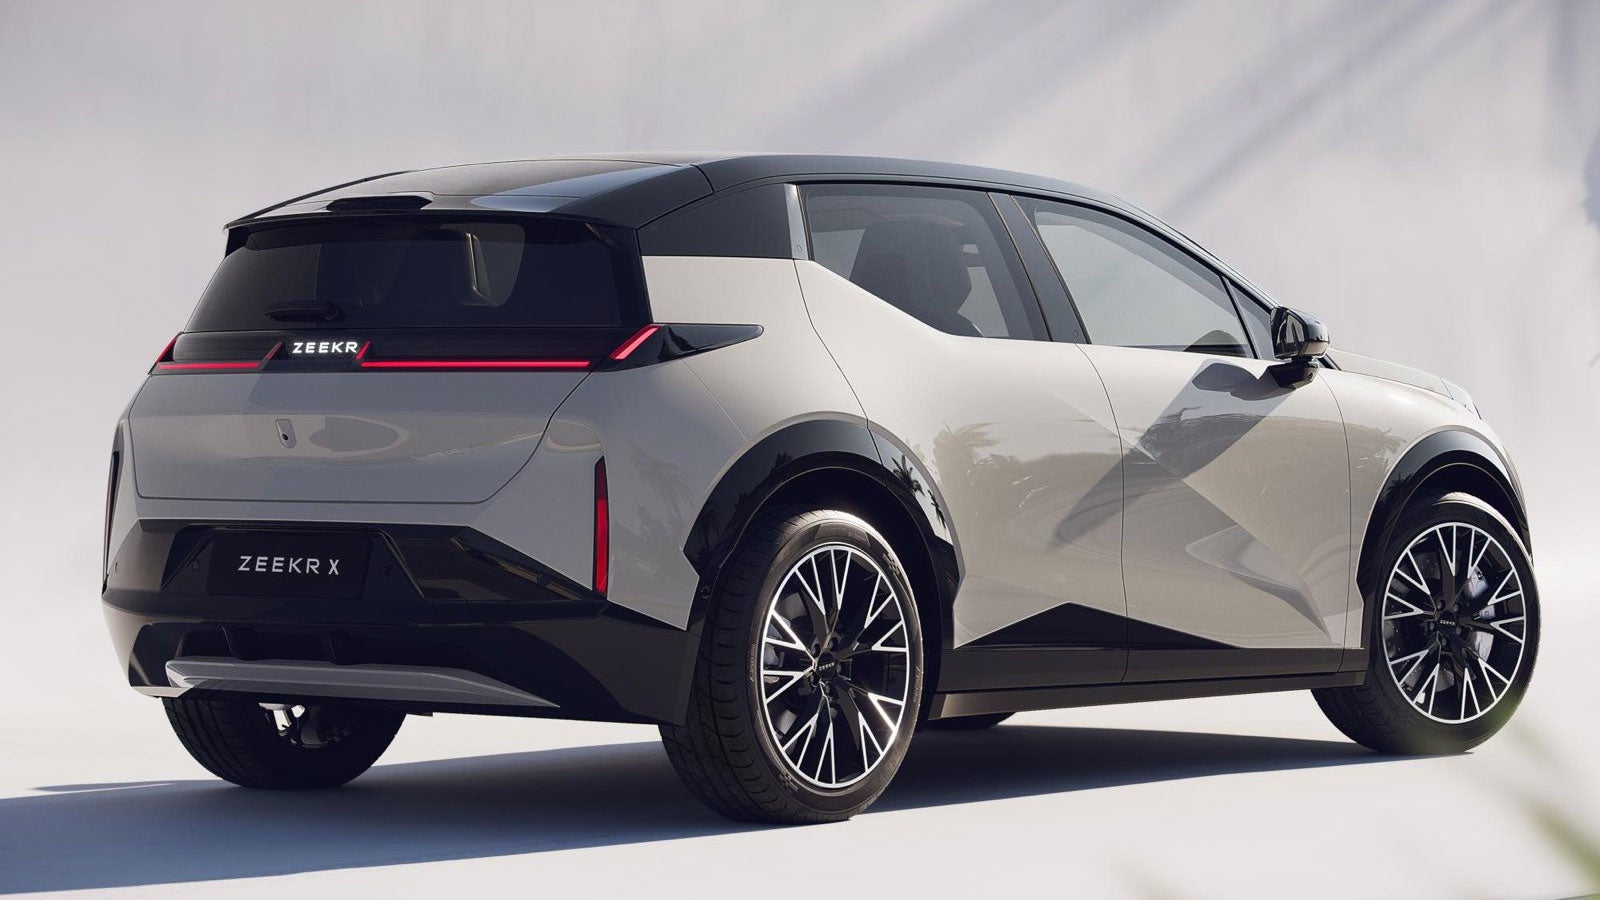 The Zeekr X Electric Crossover is Part of the Company’s Plan for EV Domination